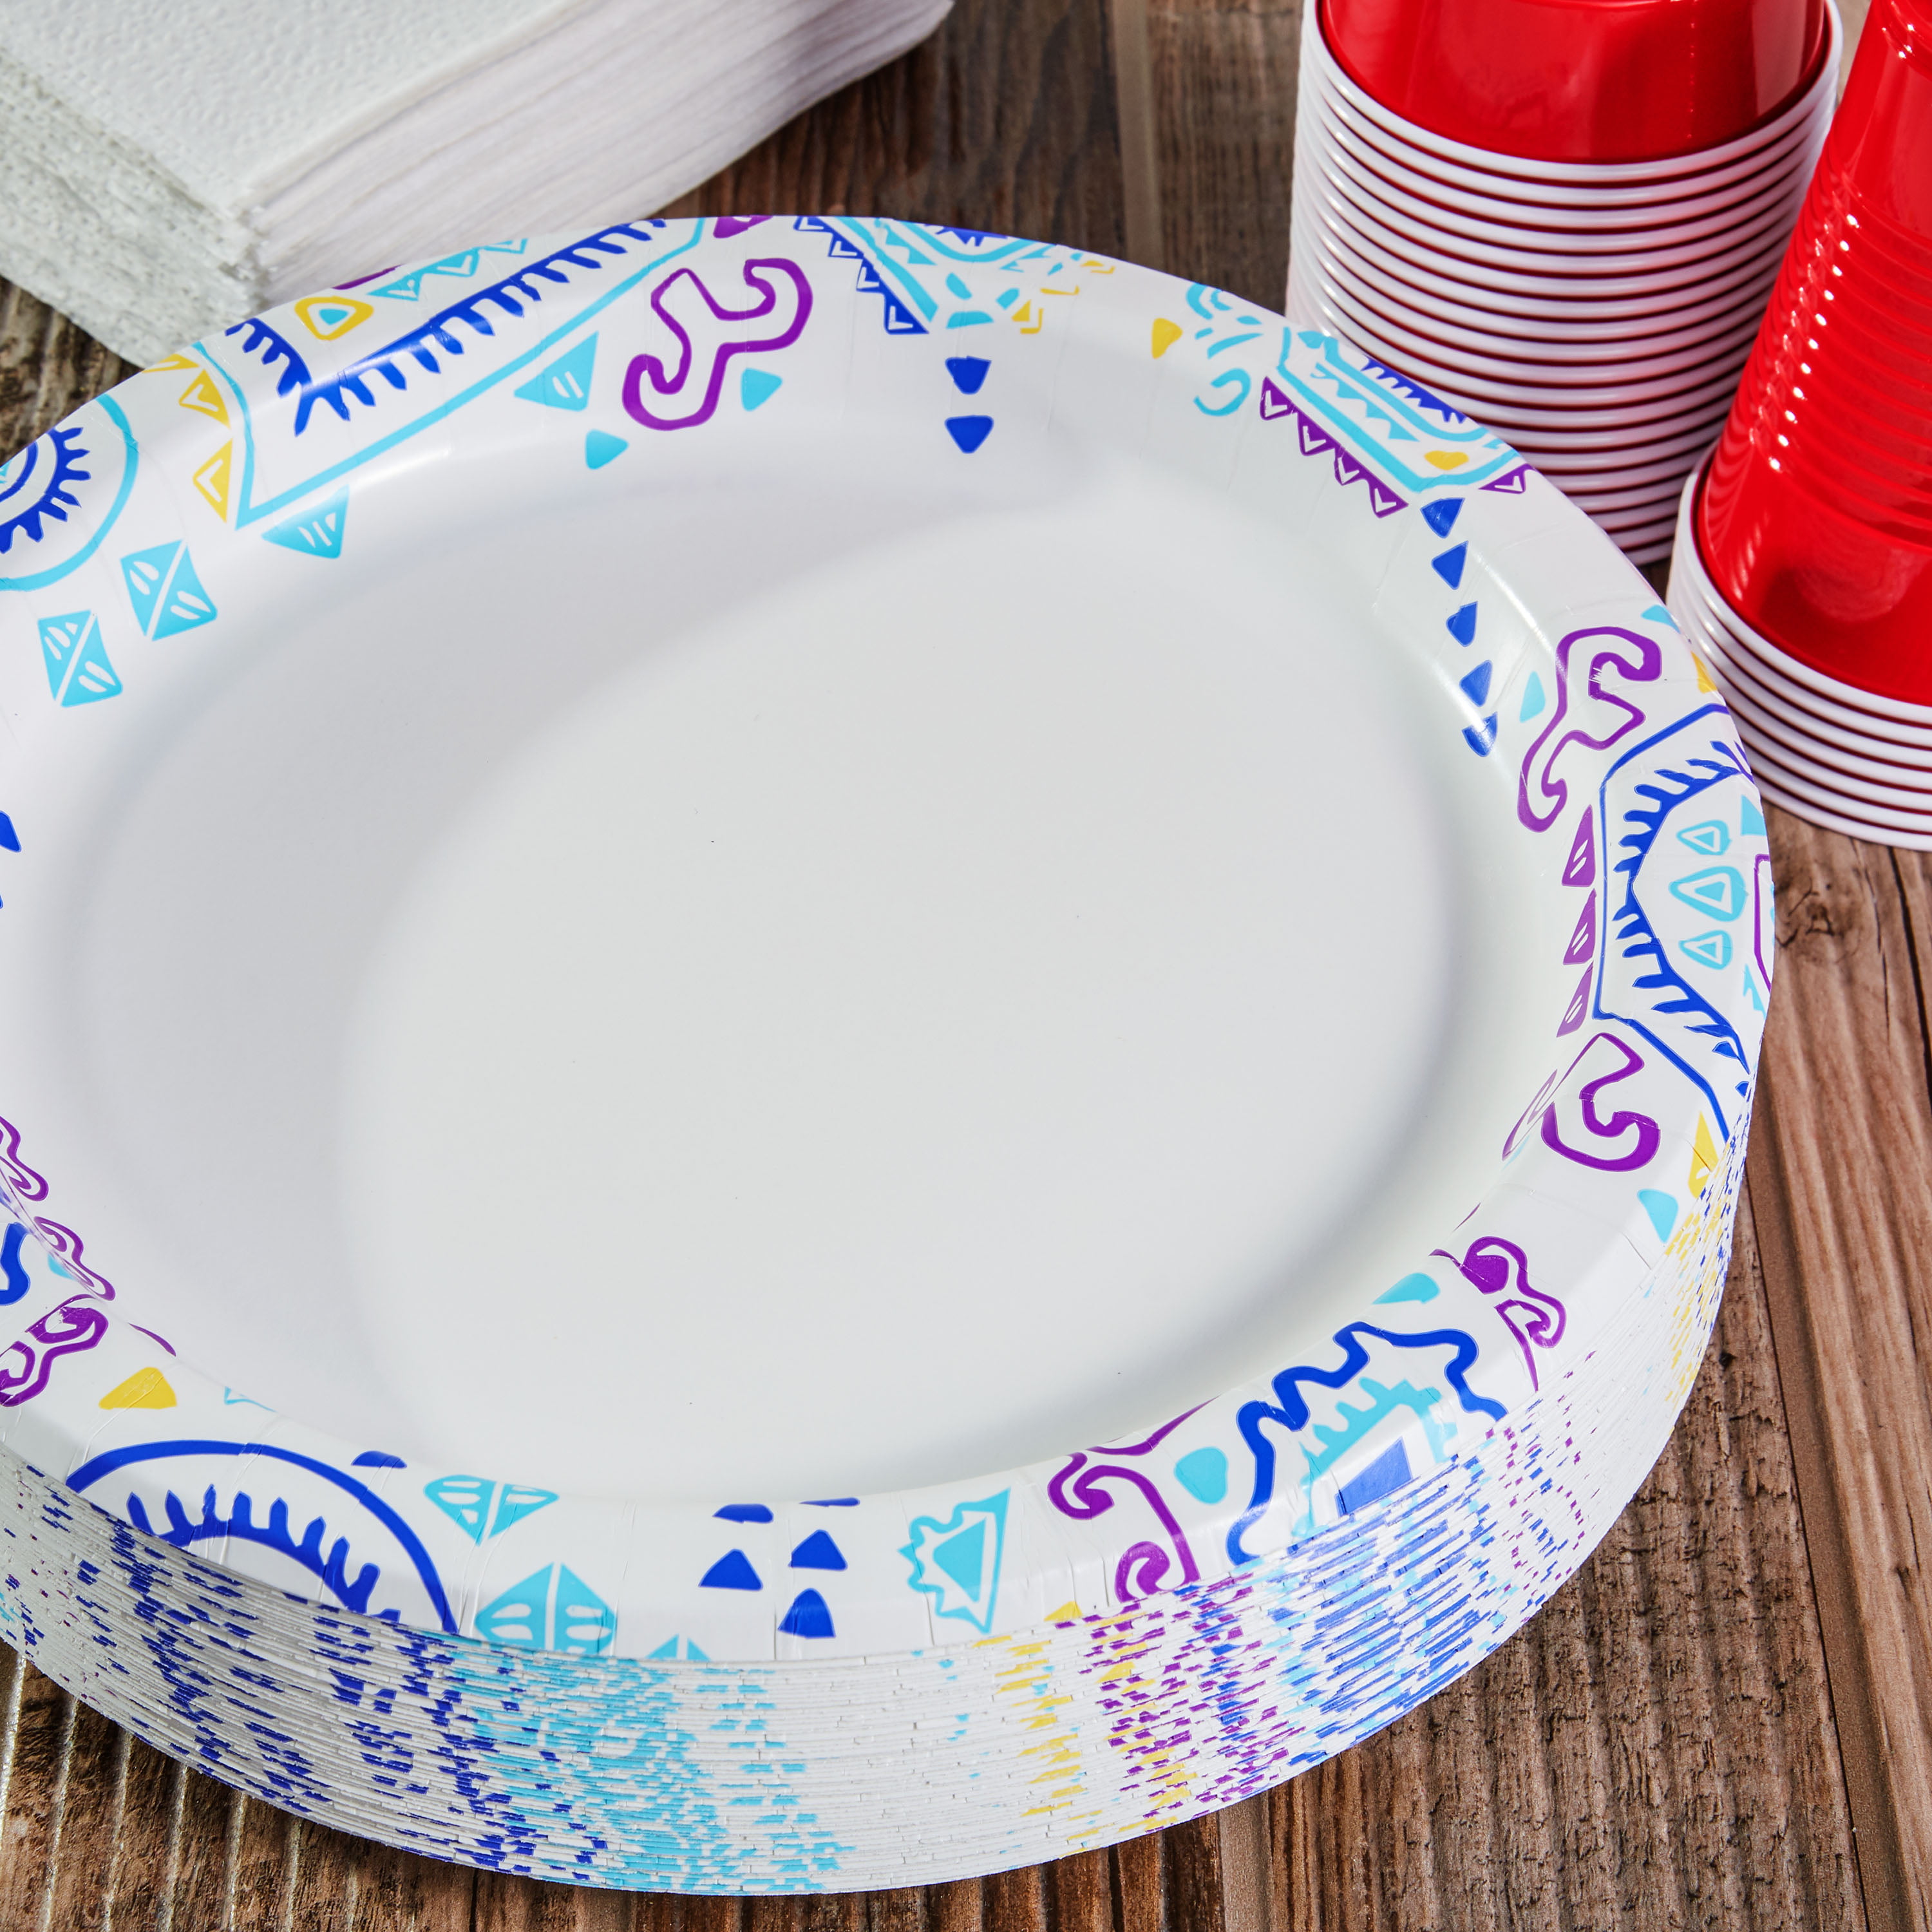 Great Value Everyday Design White Plates, 8-5/8 - 300 count